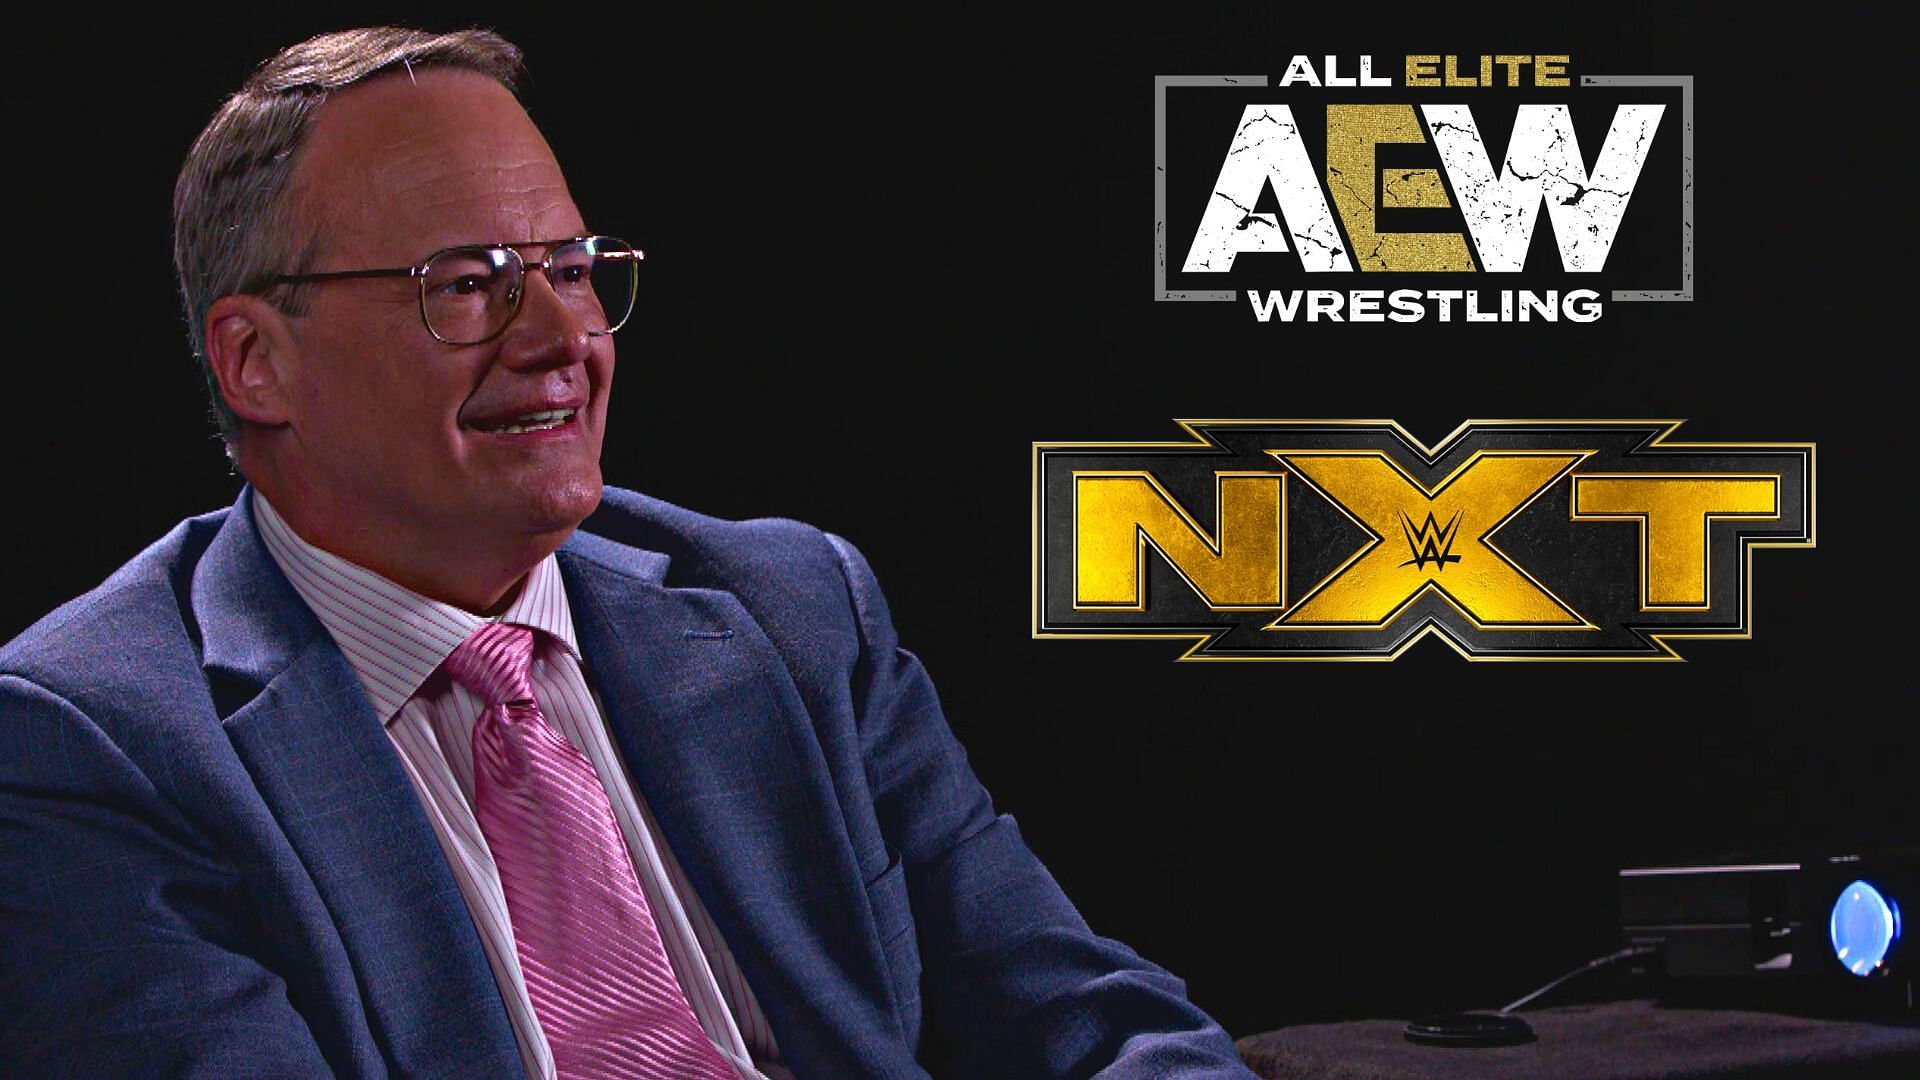 Jim Cornette had some interesting things to say this week